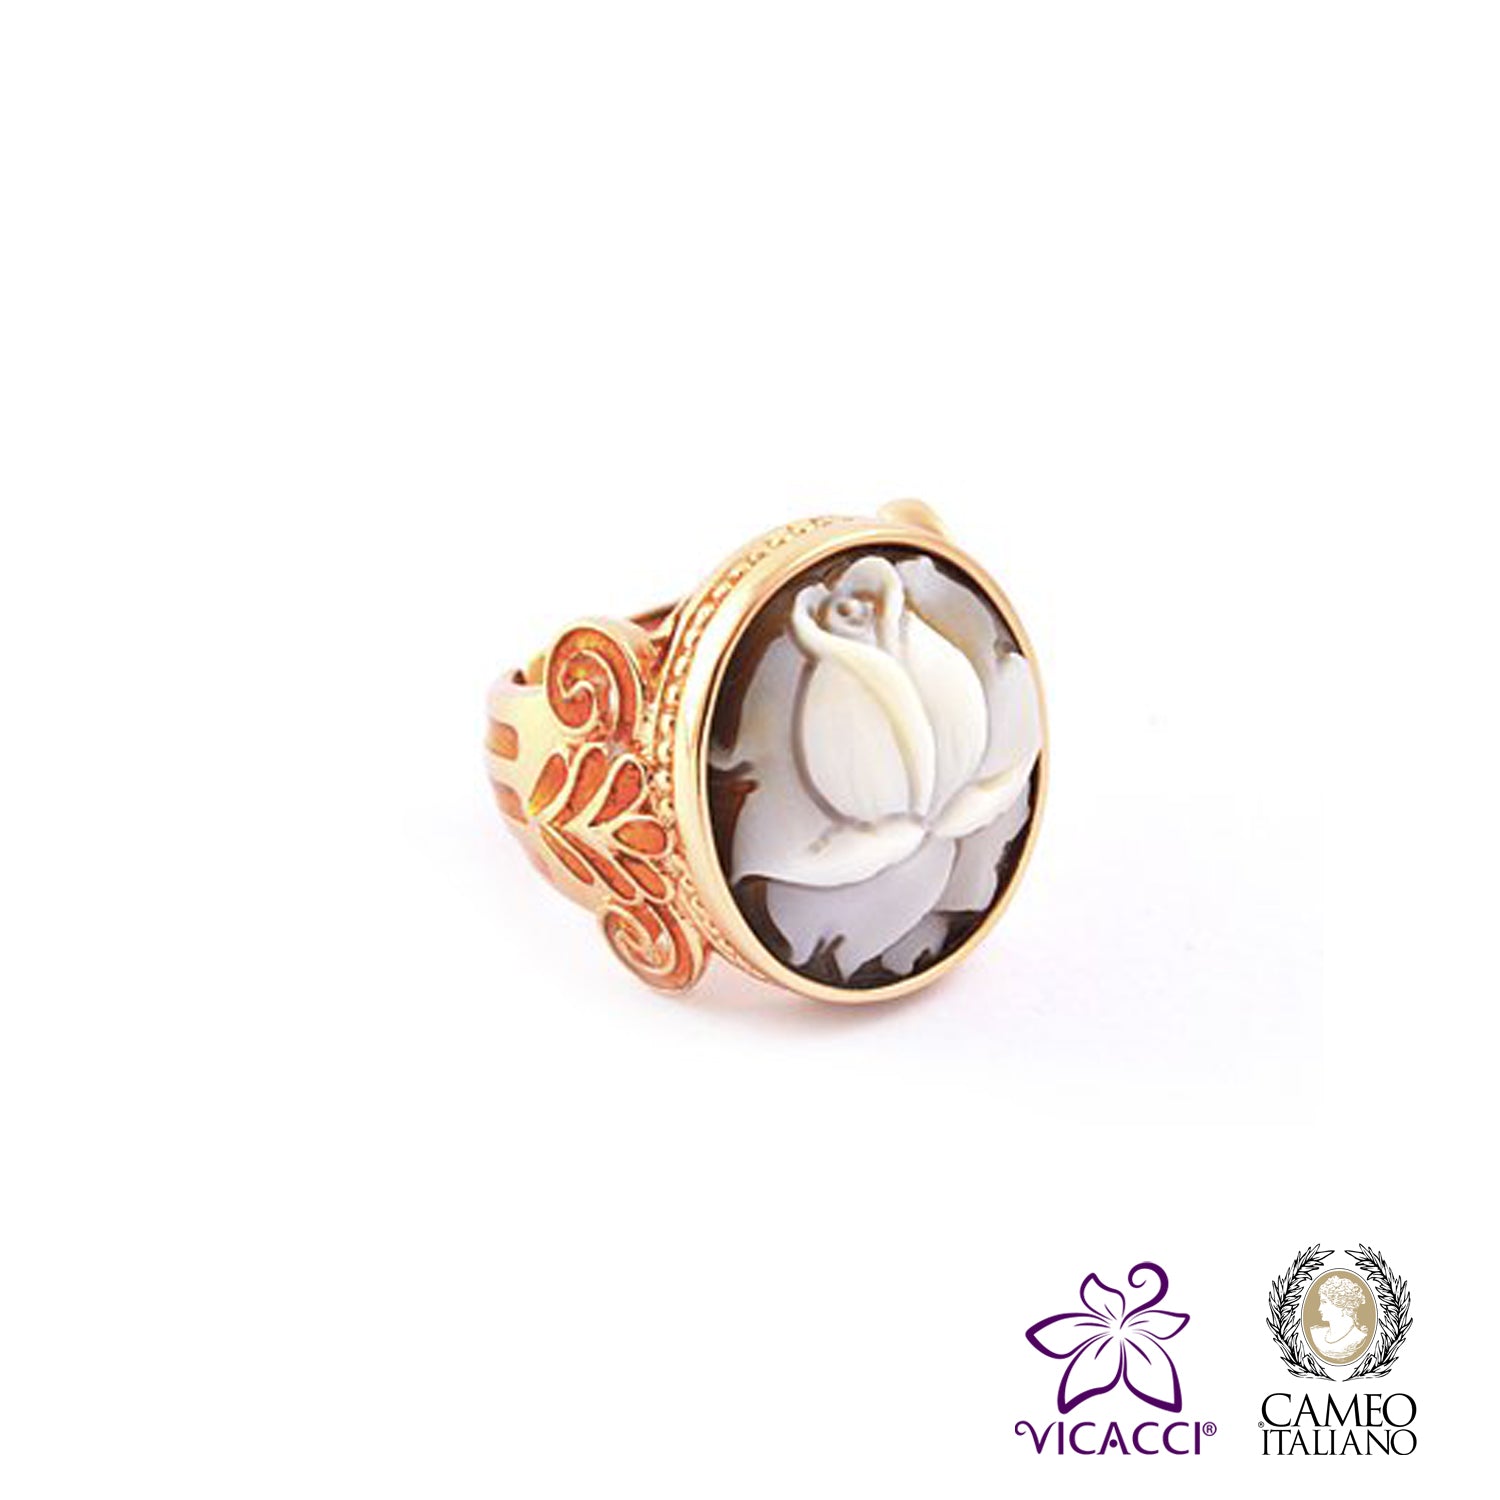 Cameo Italiano, A14 Ring , Rose Gold Plated Sterling Silver